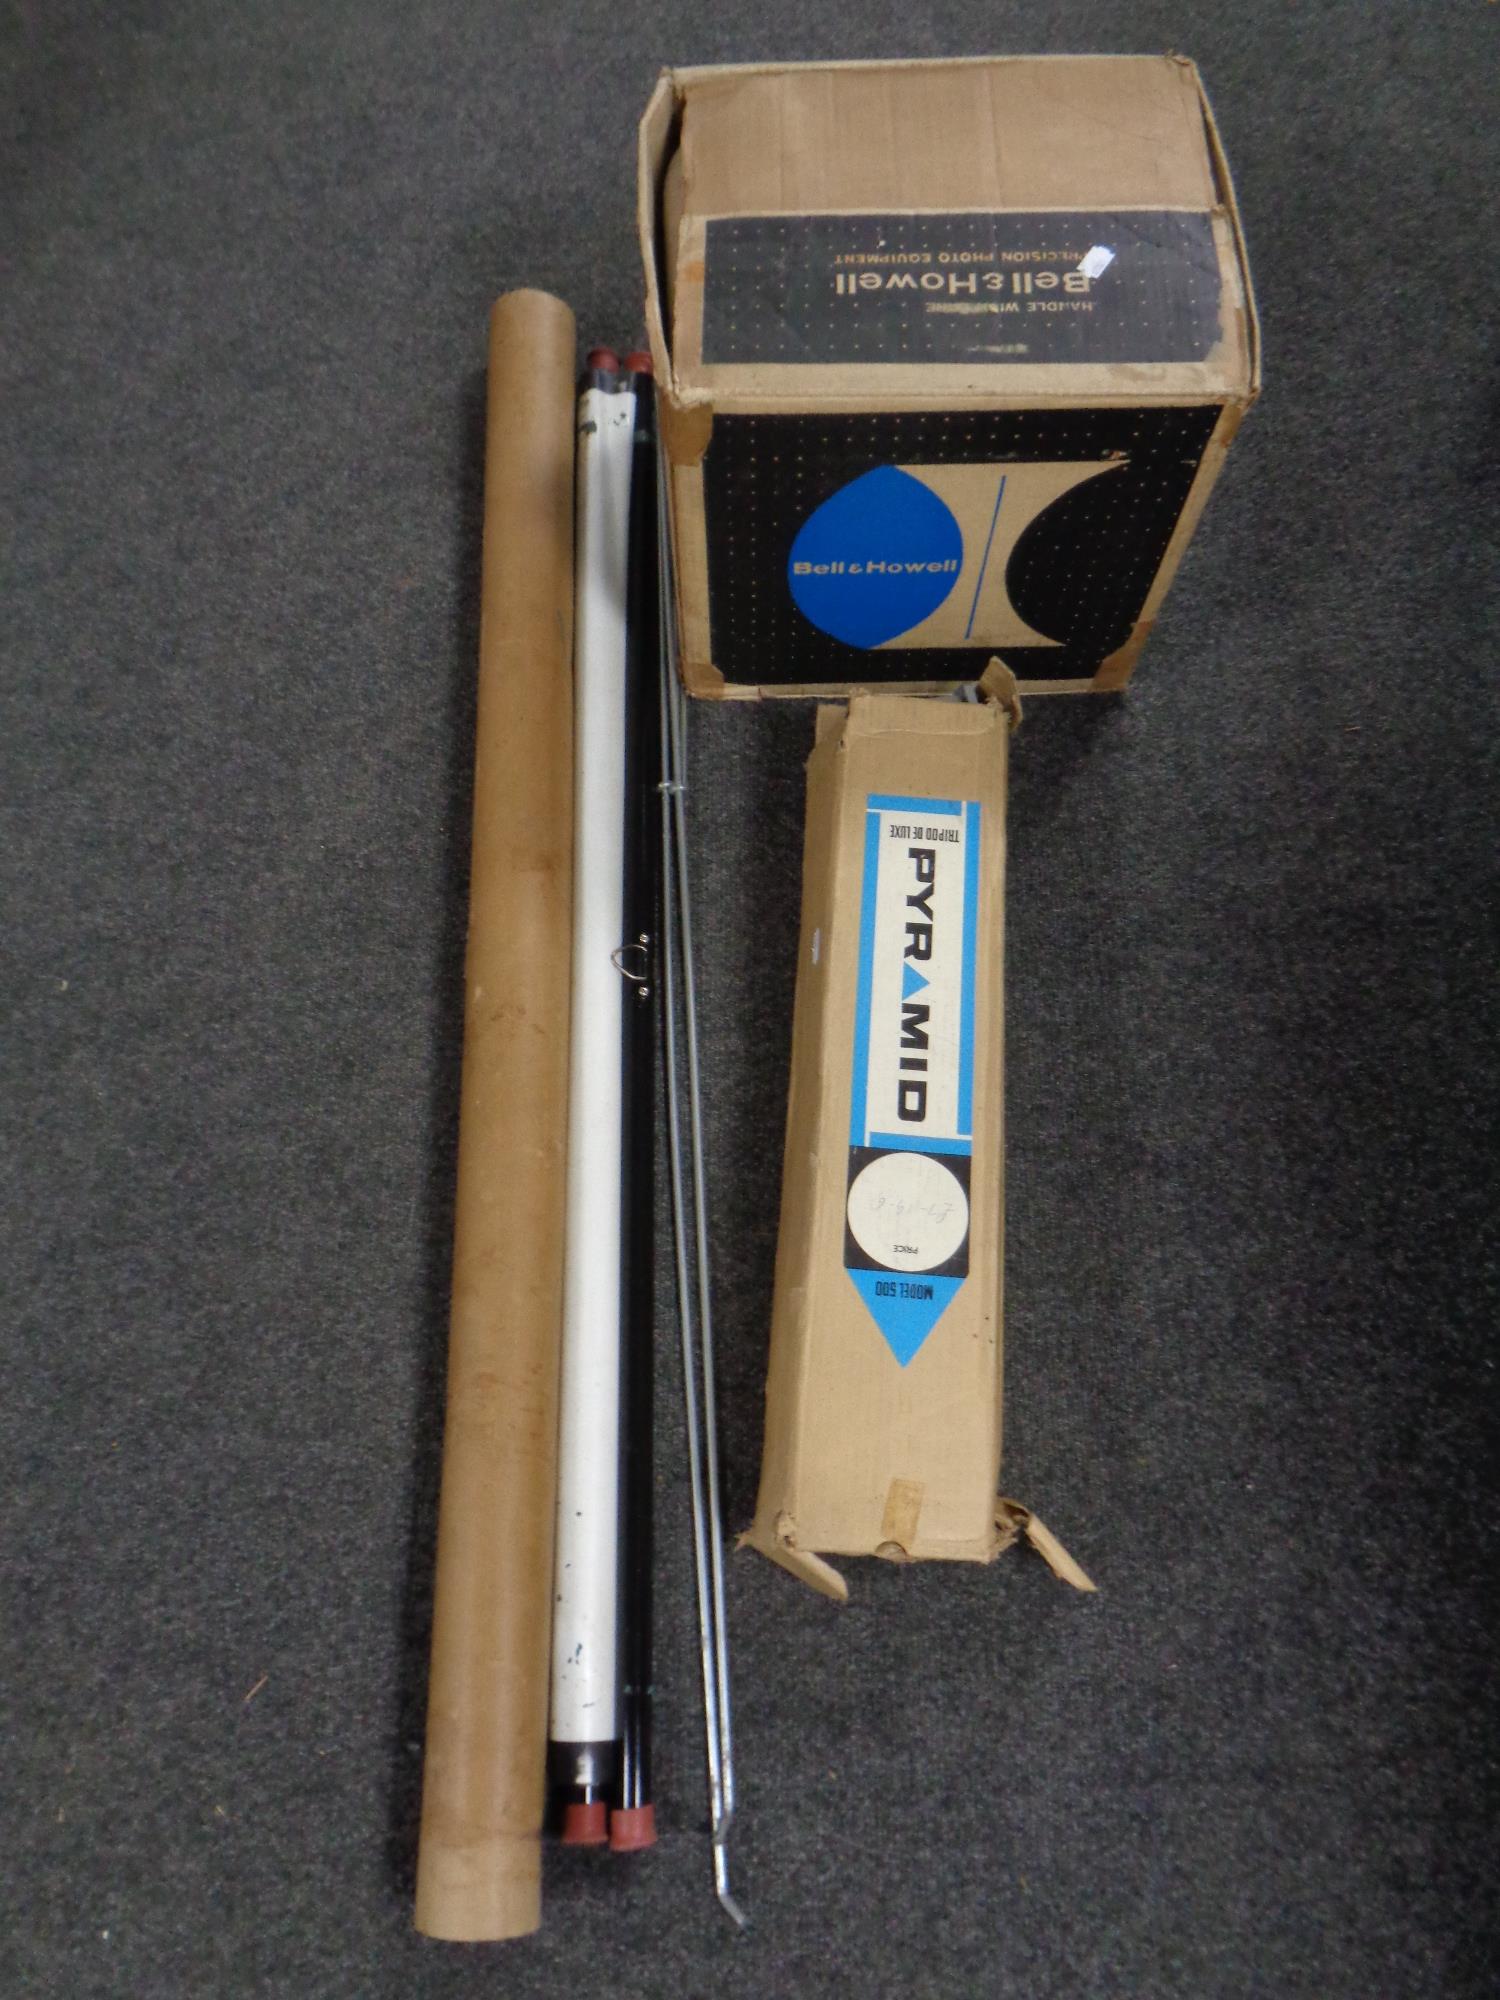 A Bell and Howell projector boxed together with a Pyramid camera tripod boxed and a projector